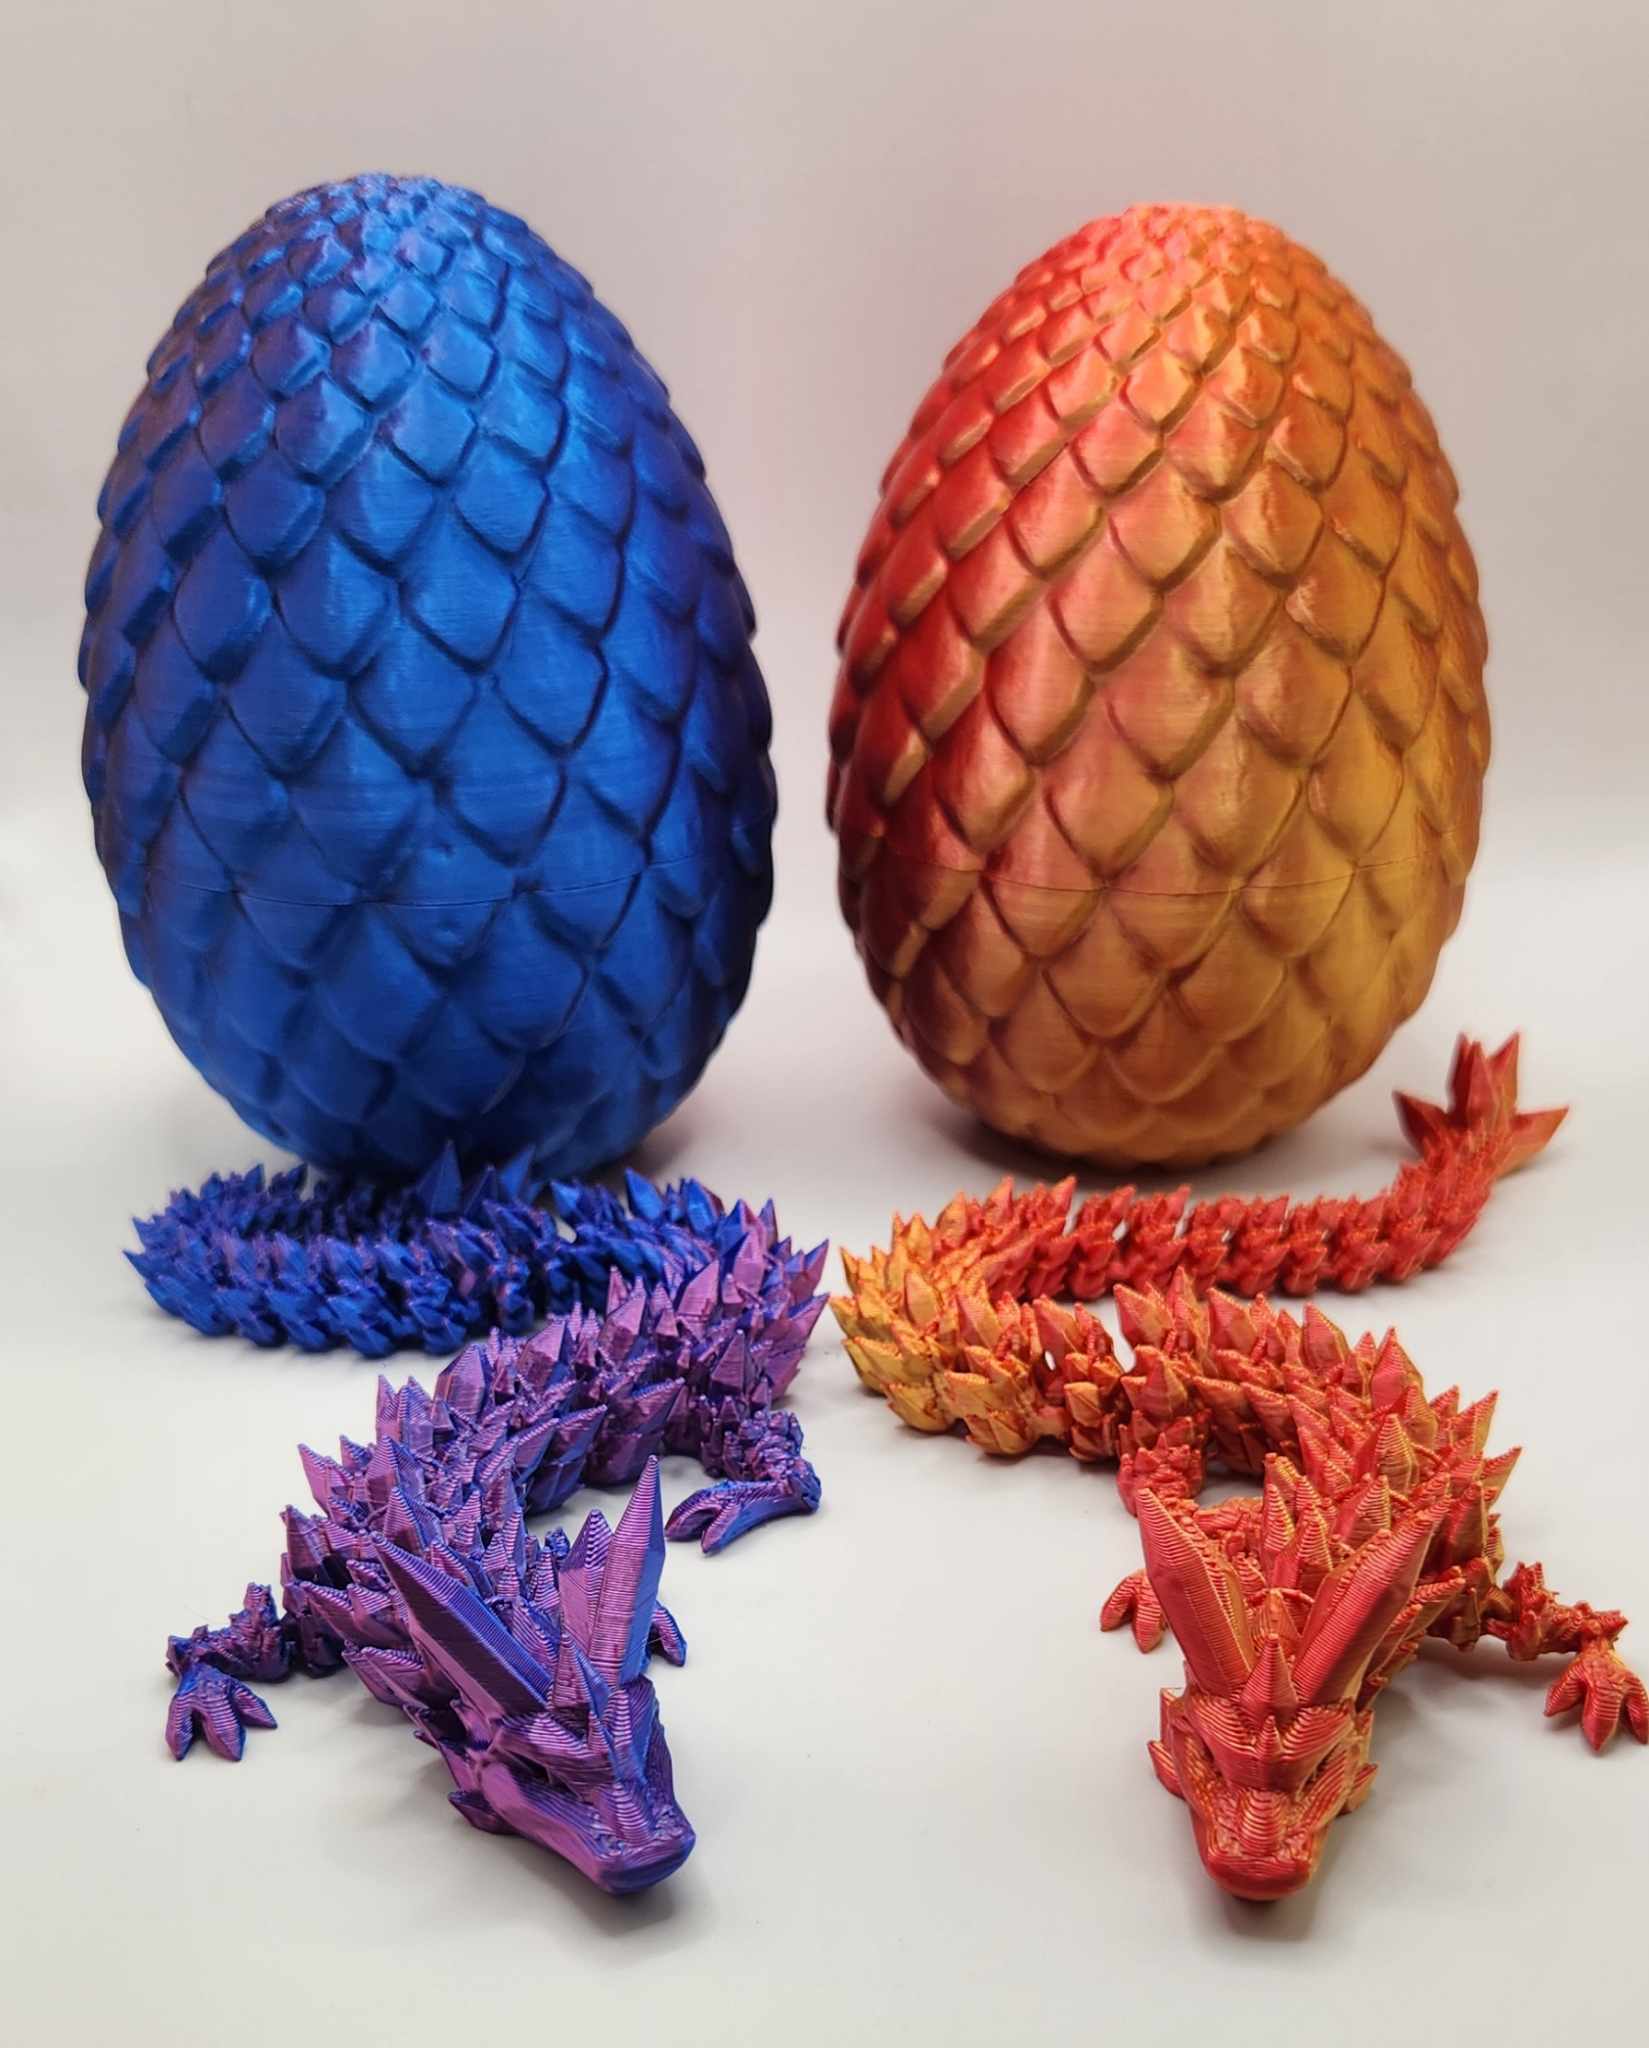 3D Printed Dragons - Dusty's Country Store